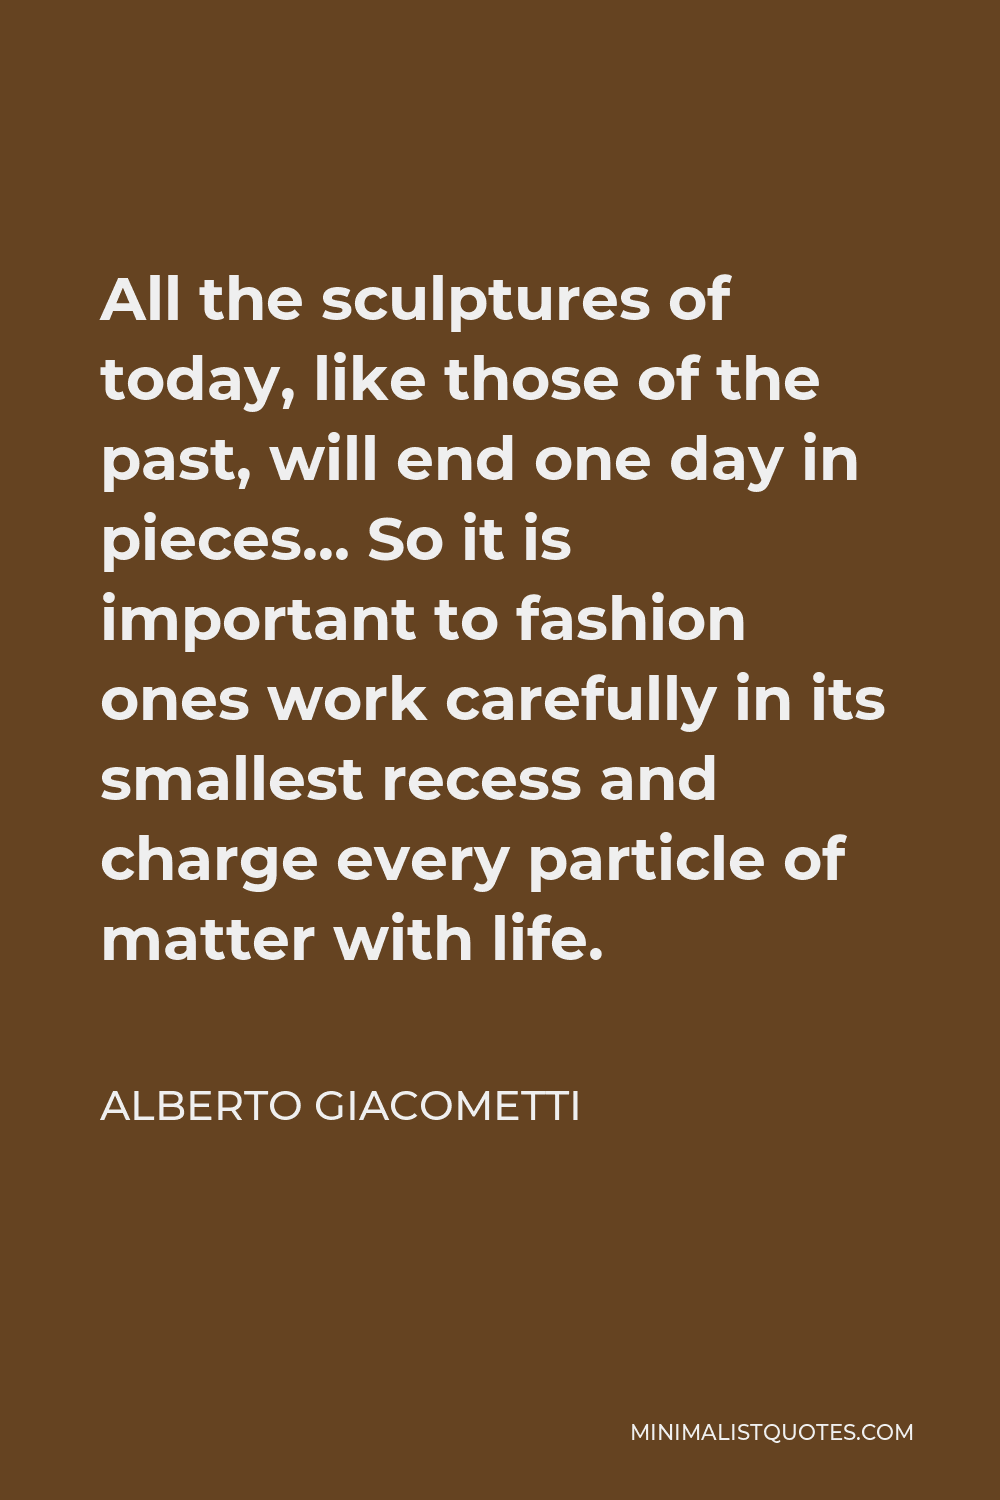 Alberto Giacometti Quote - All the sculptures of today, like those of the past, will end one day in pieces… So it is important to fashion ones work carefully in its smallest recess and charge every particle of matter with life.